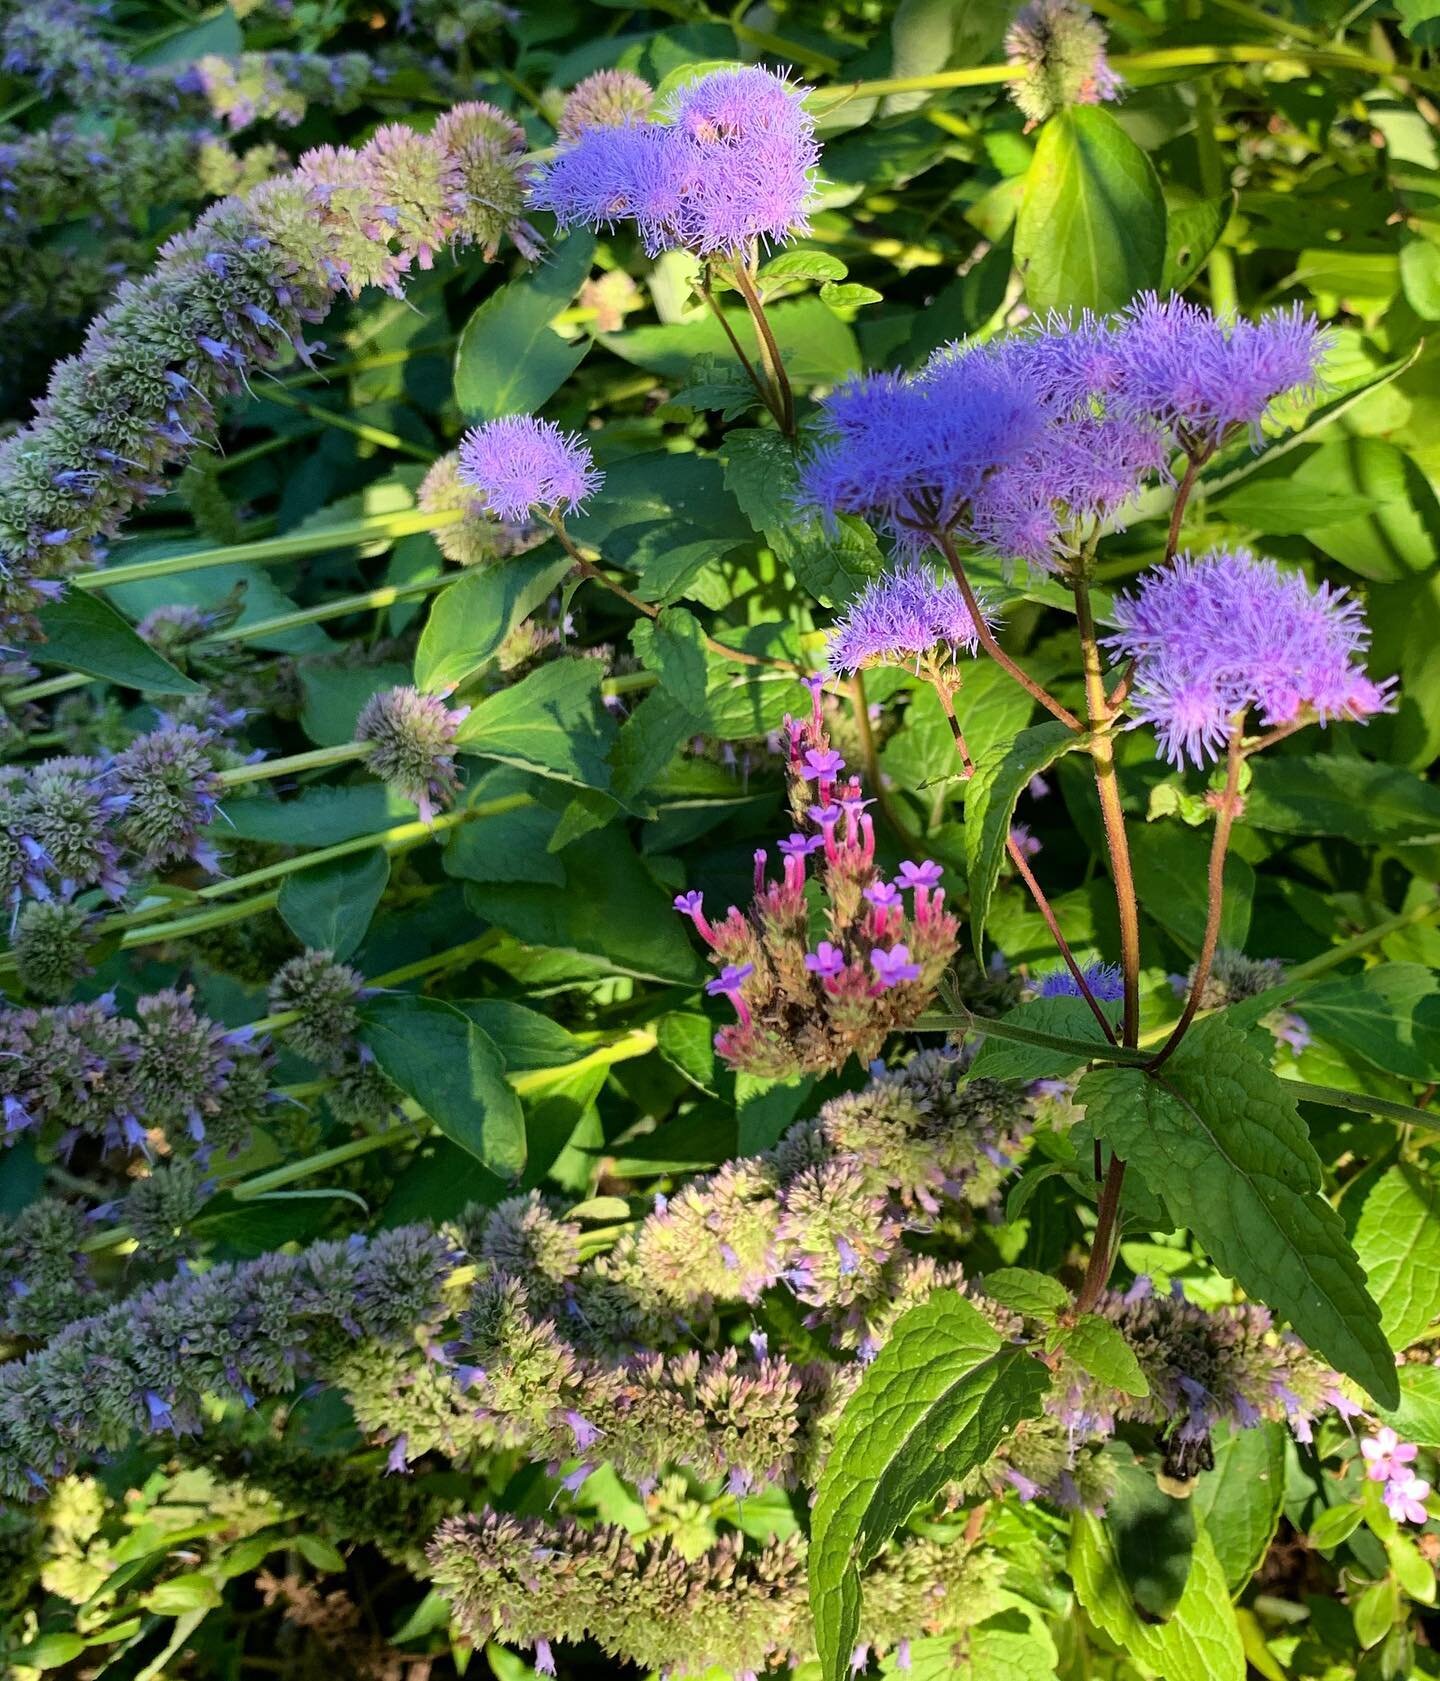 Agastache, ageratum and verbena bonariensis mingling in the afternoon sunshine...
.
.
.
#agastache #hummingbirdmint #hyssop #ageratum #verbenabonariensis #flower #flowers #purpleflowers #blueflowers #blooming #bloomingnow #septembergarden #garden #ga